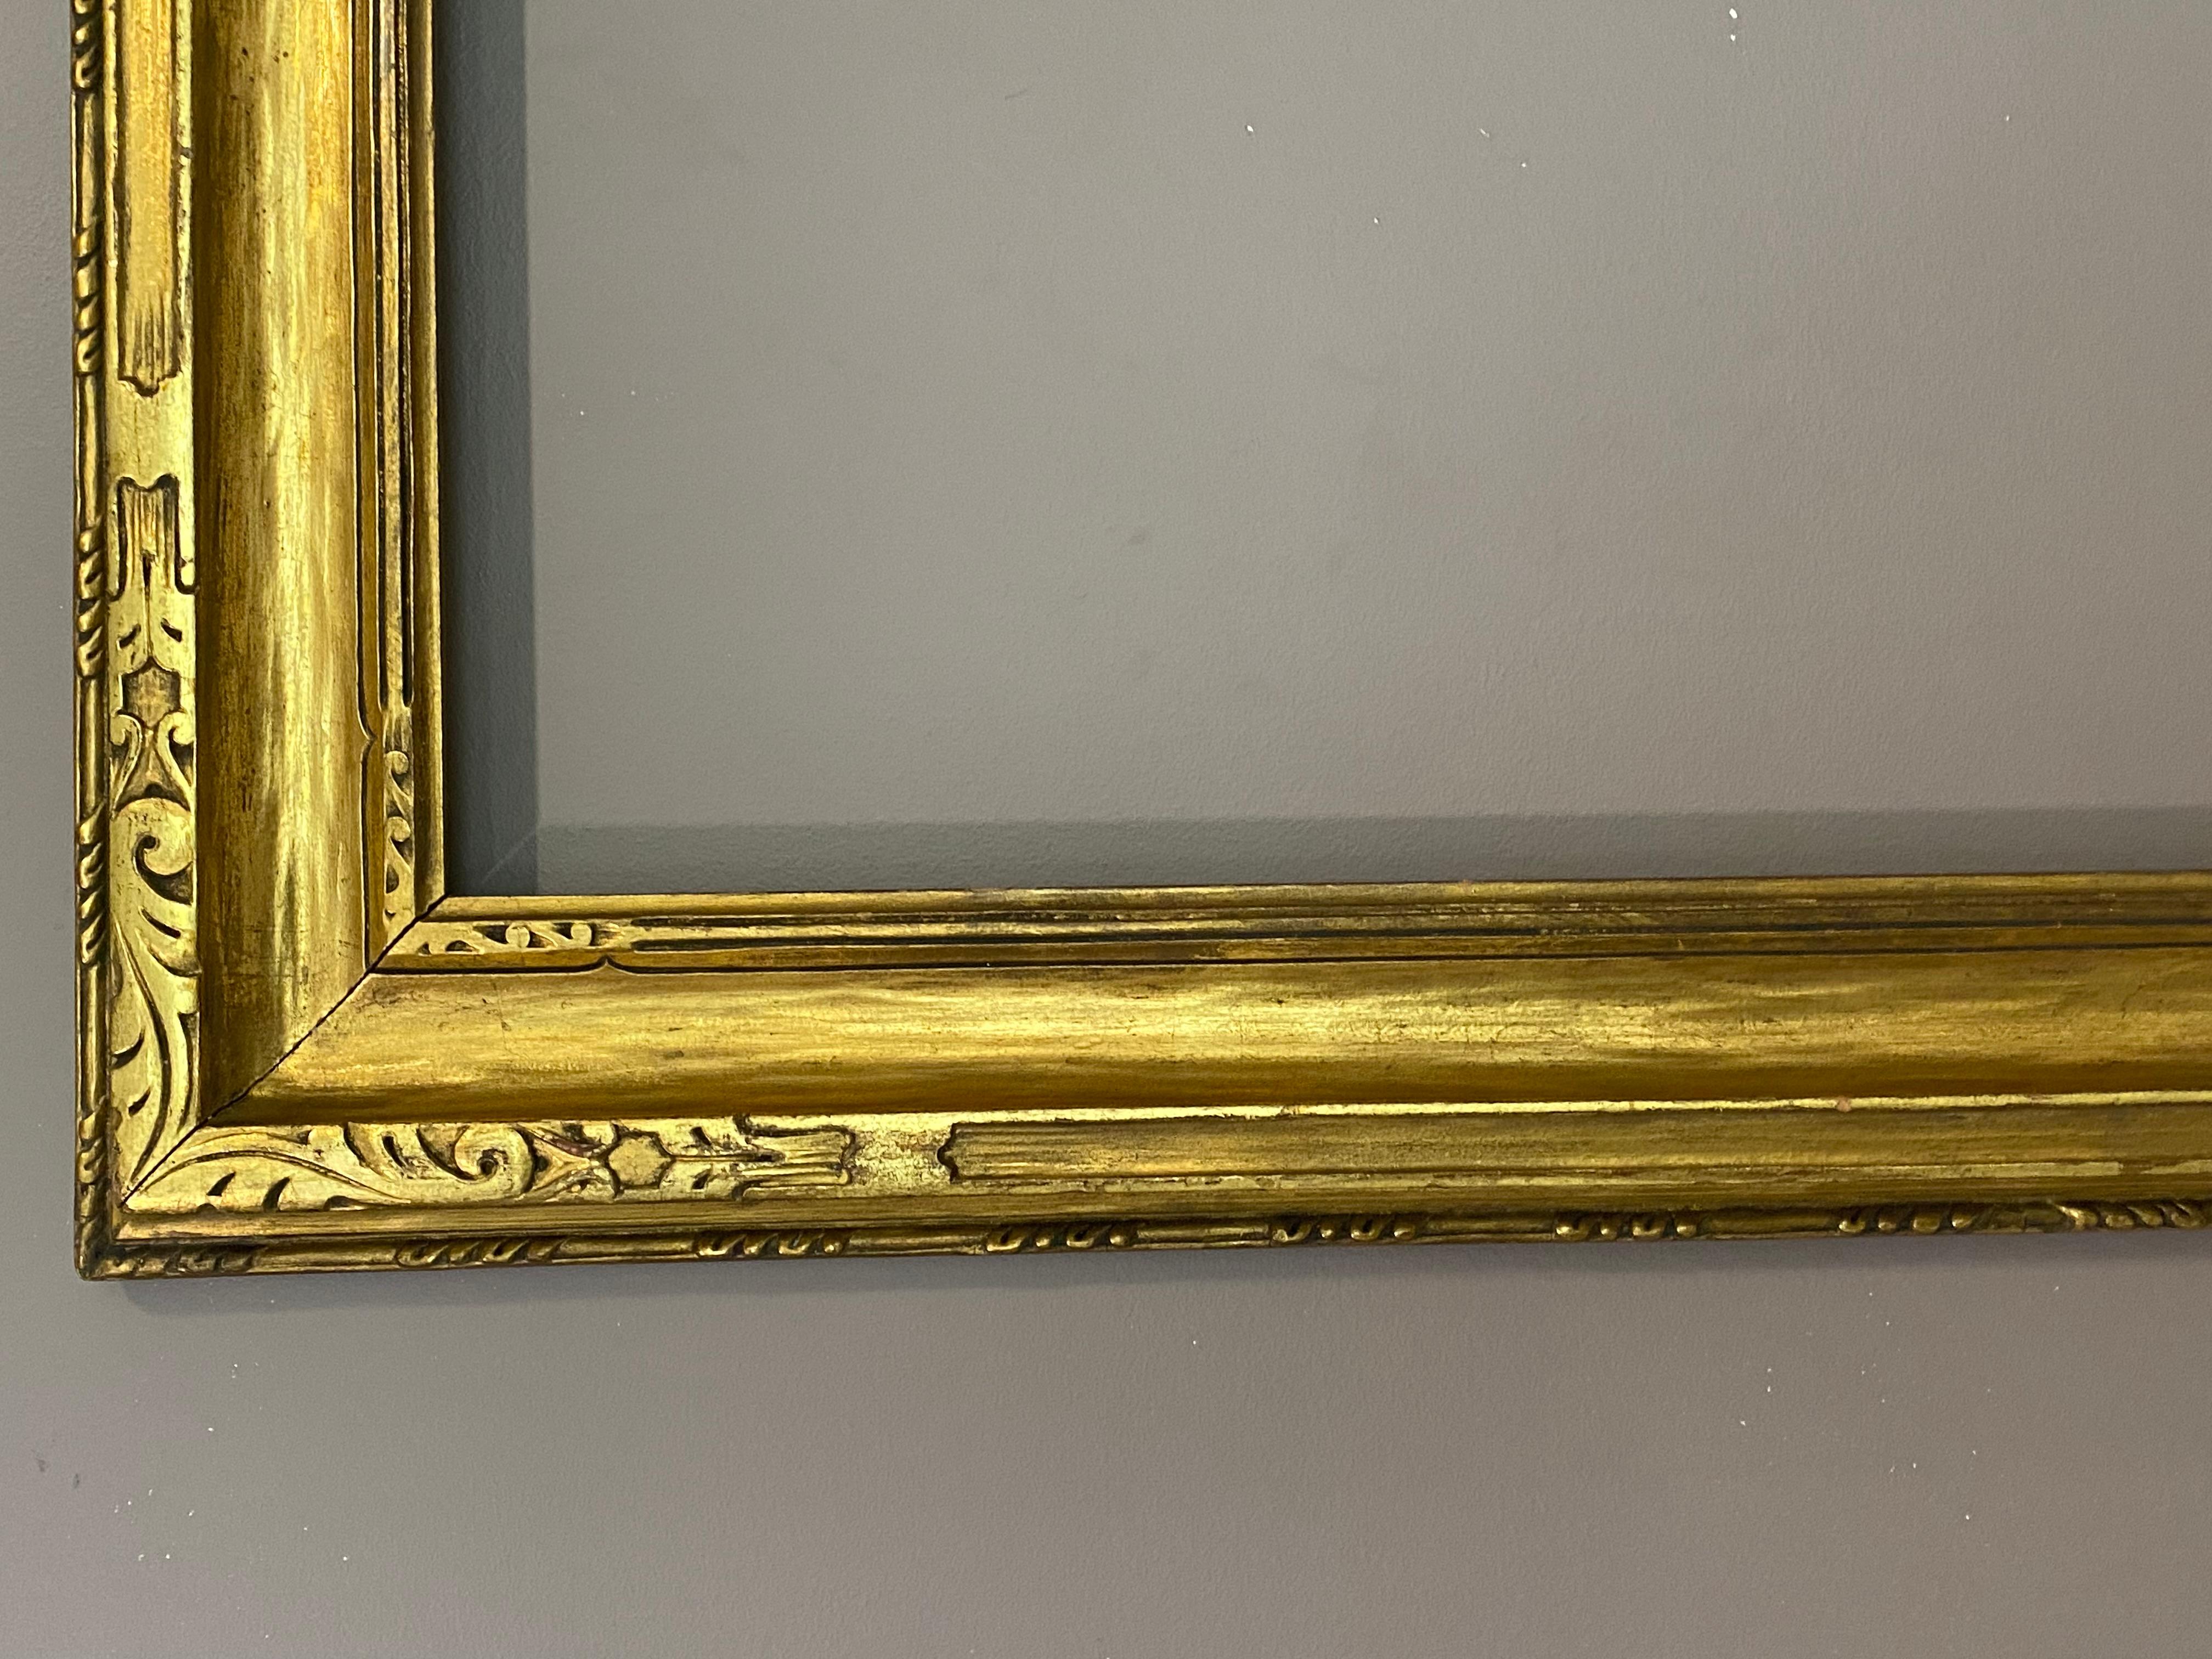 1920s picture frame